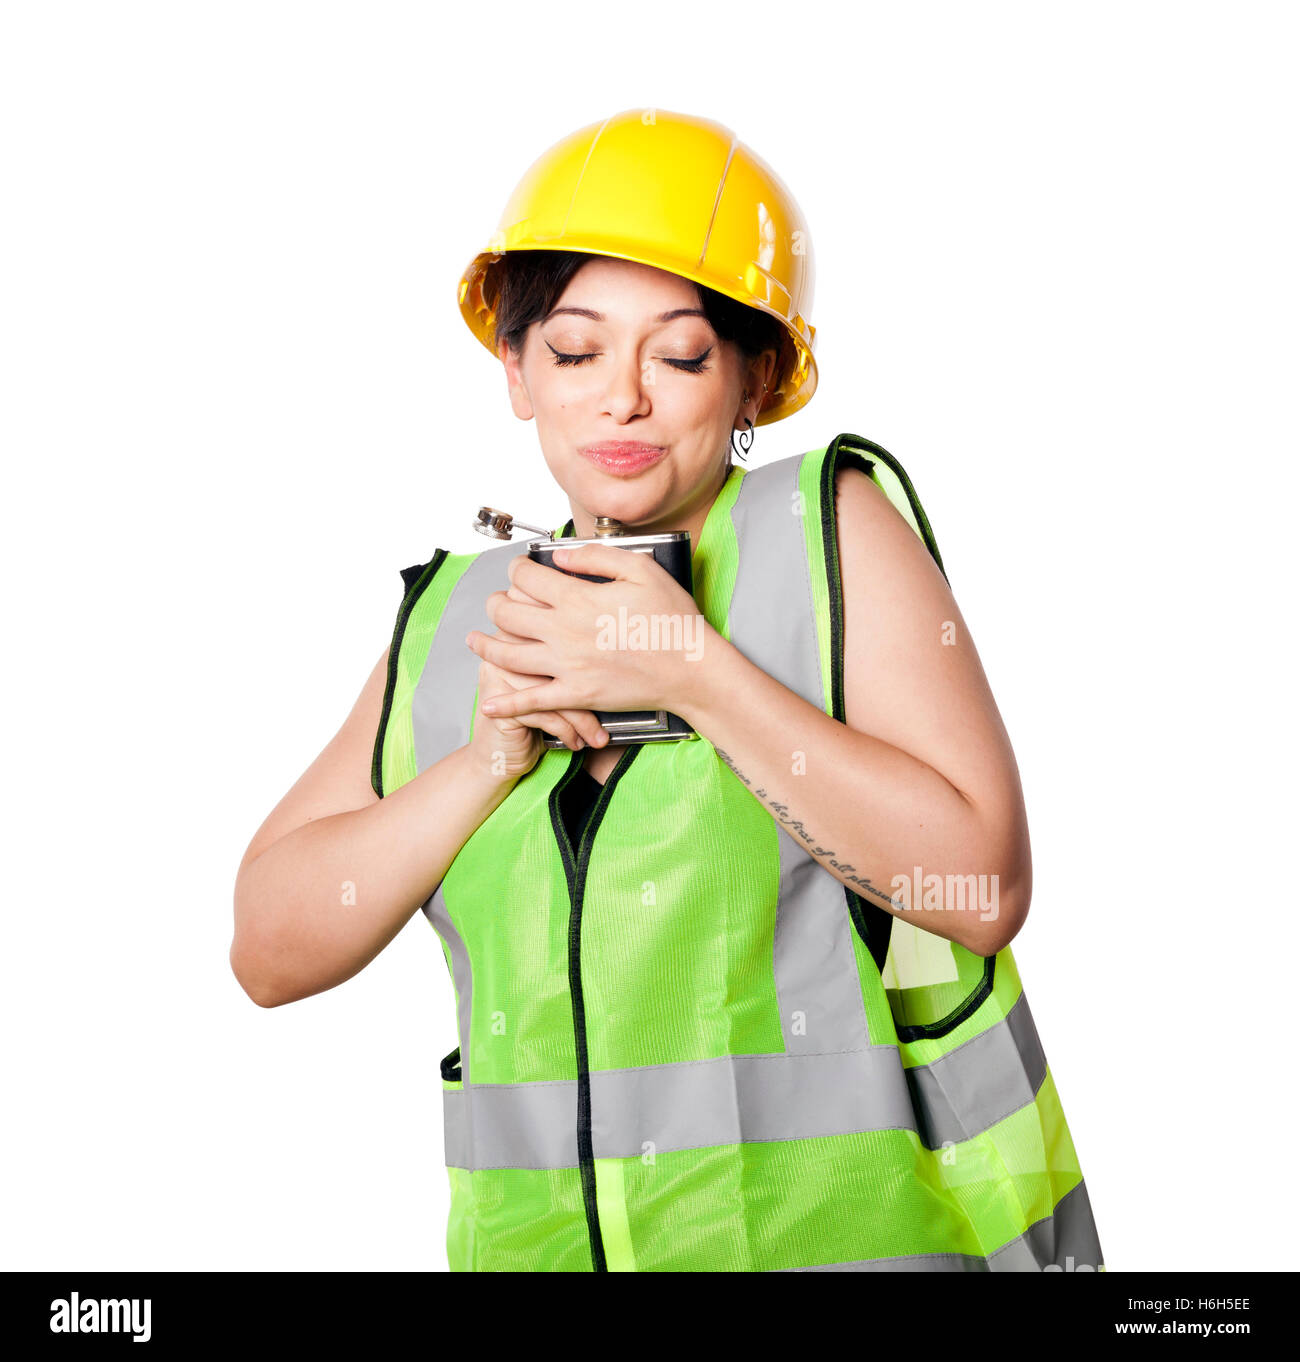 Caucasian young adult woman in her mid 20s wearing reflective yellow safety helmet and safety vest, hugging a hip flask. Isolate Stock Photo